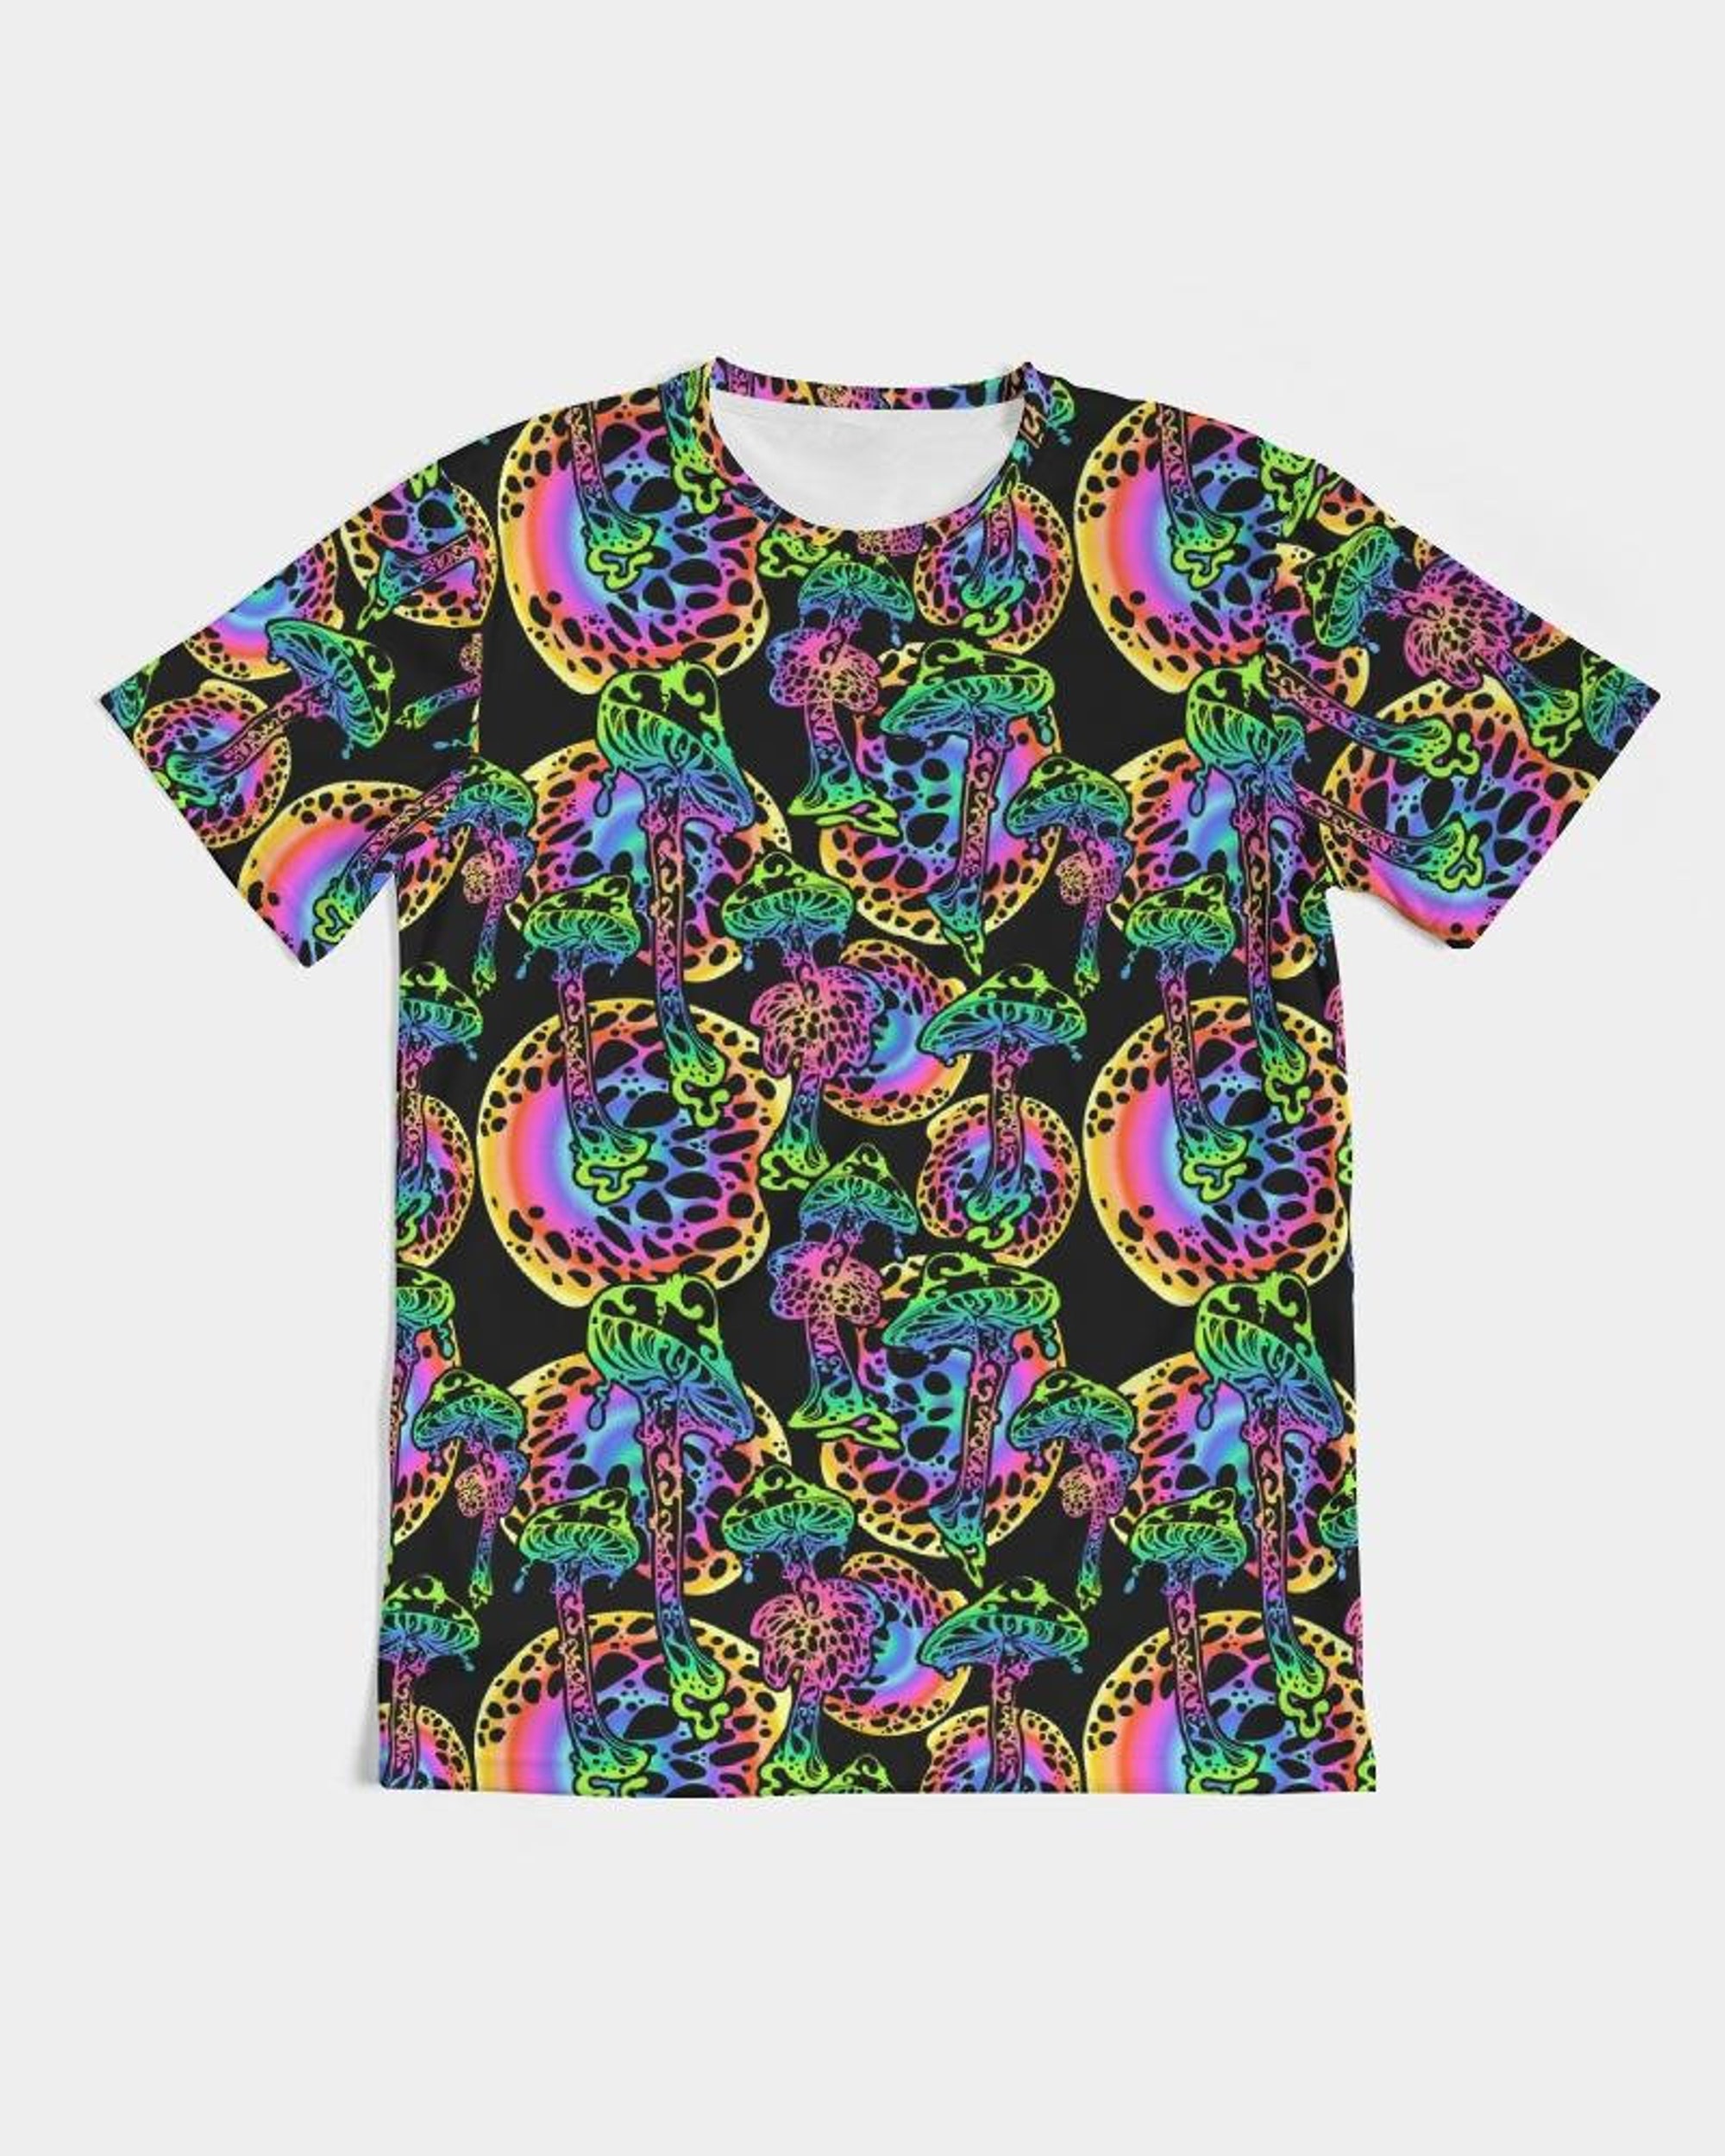 Discover Glowing Psychedelic Mushrooms 3D T Shirt